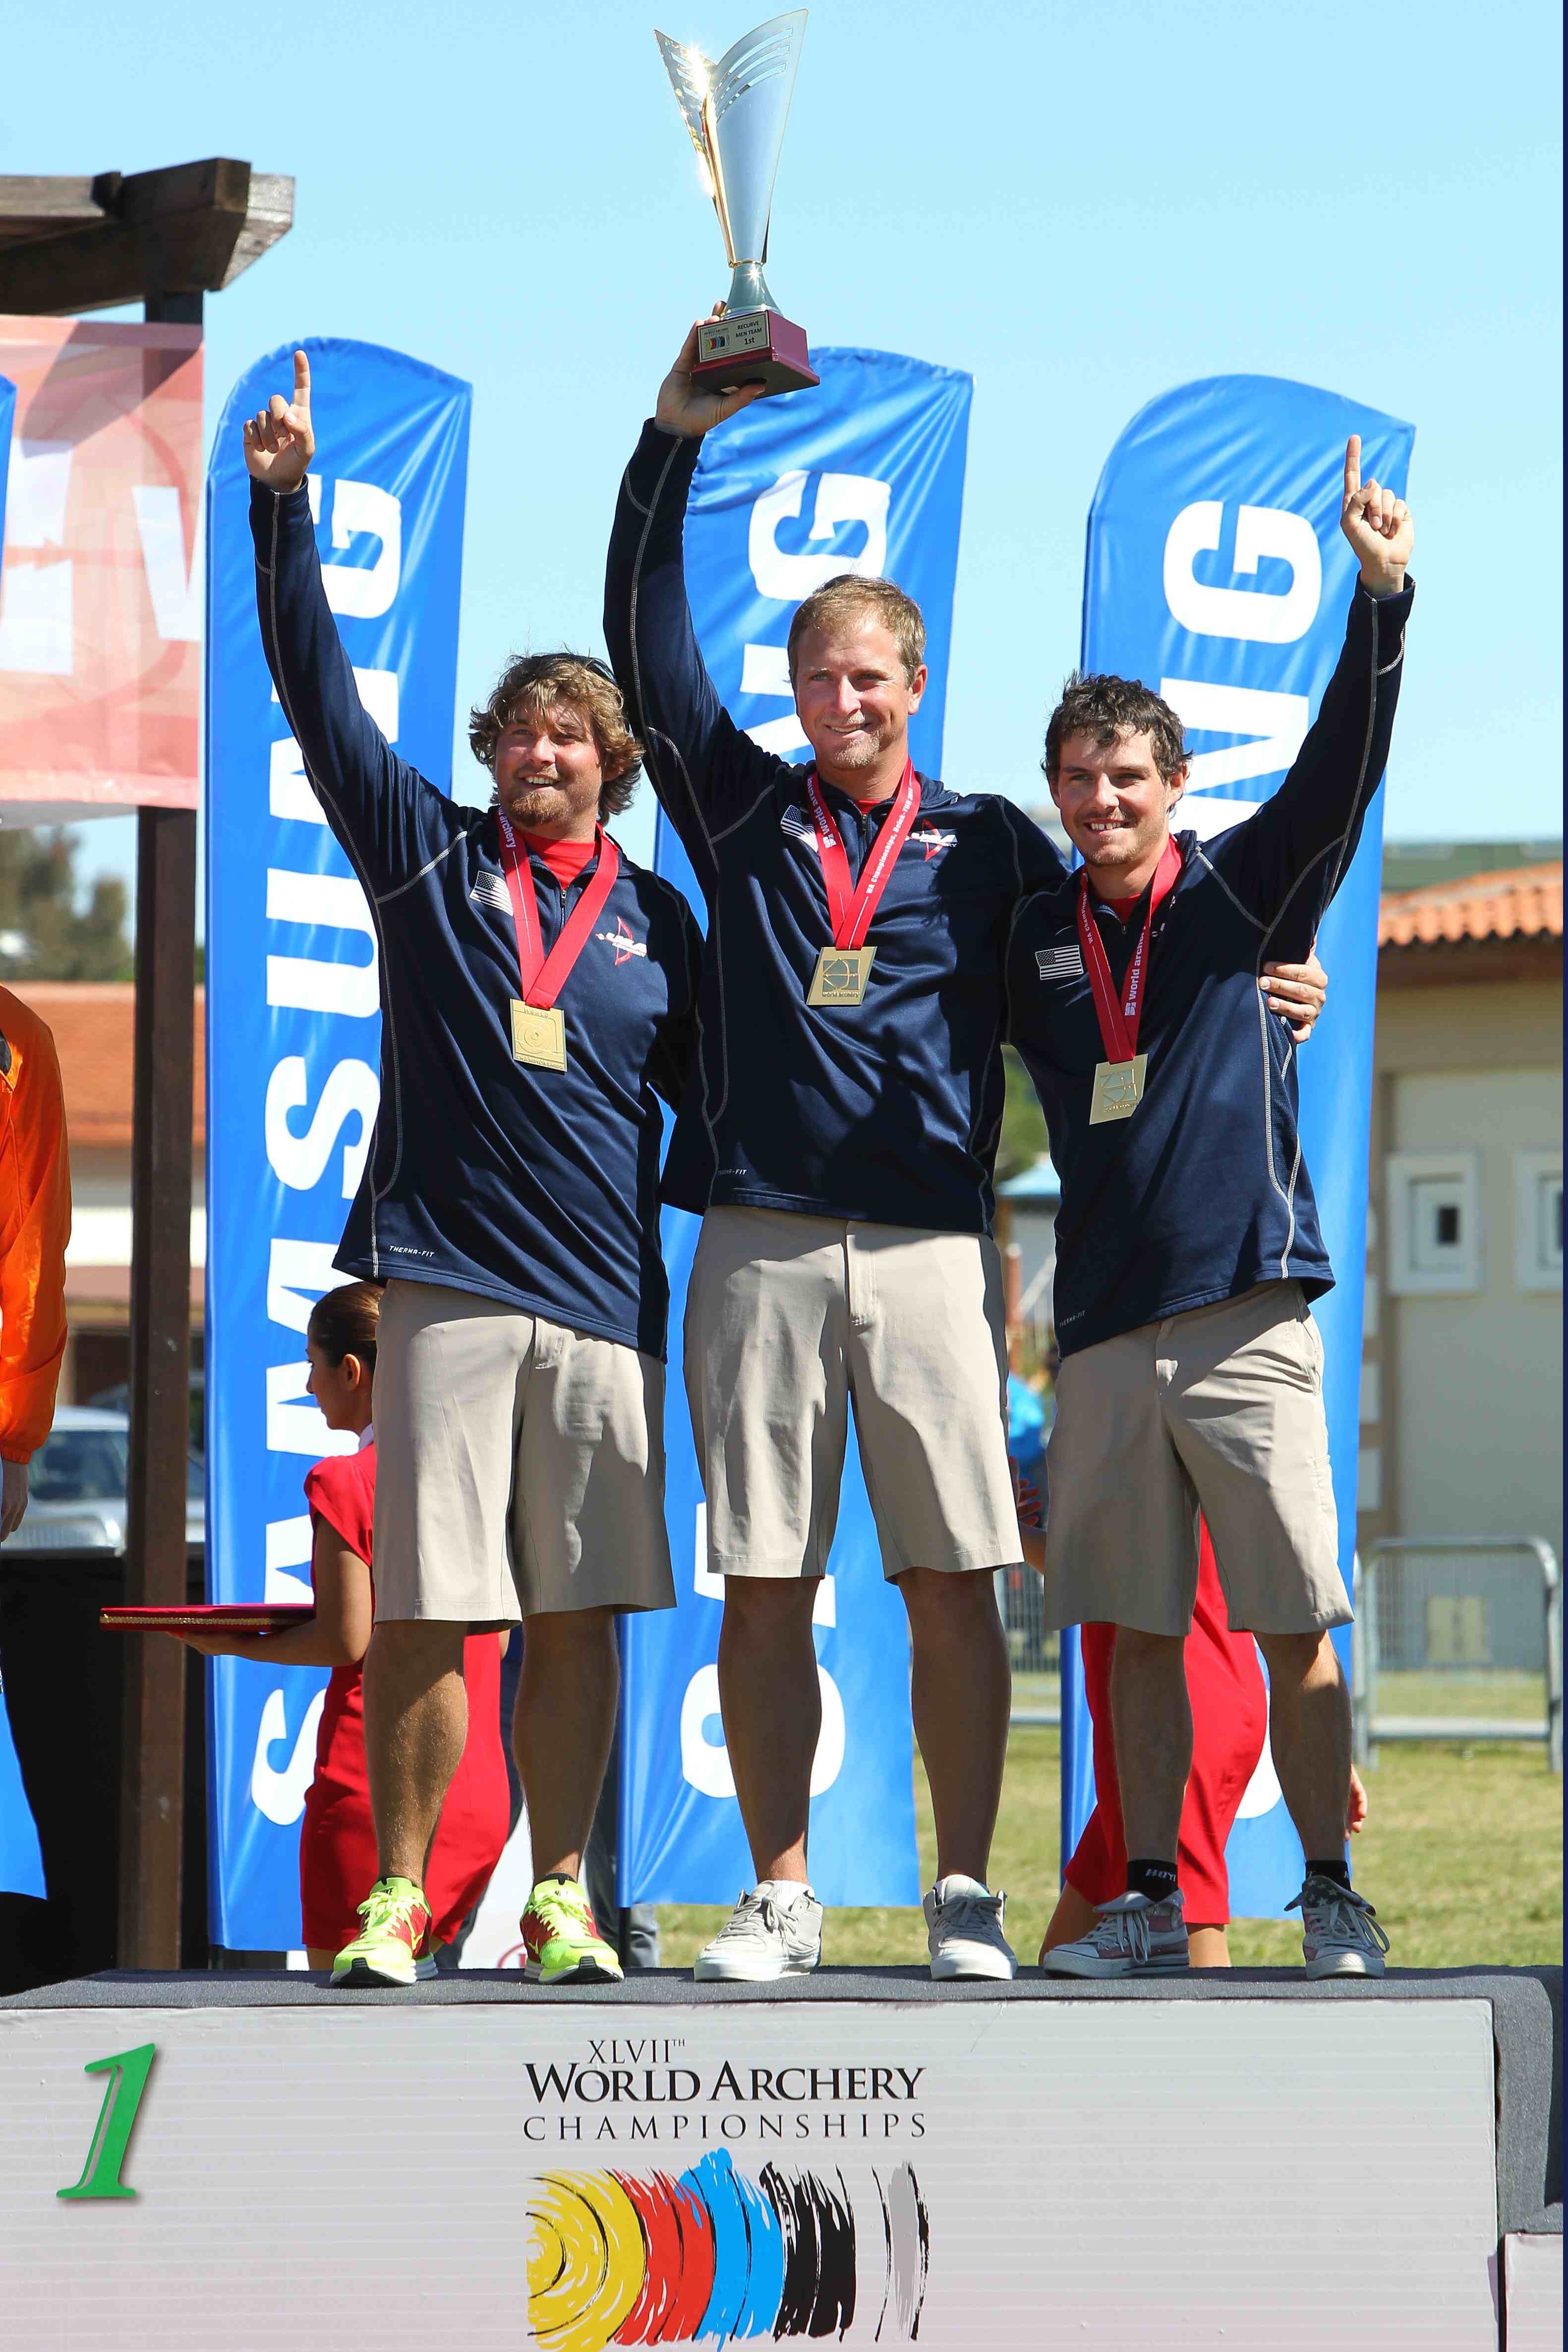 Results from USA Archery national events and international tournaments for Team USA archers.